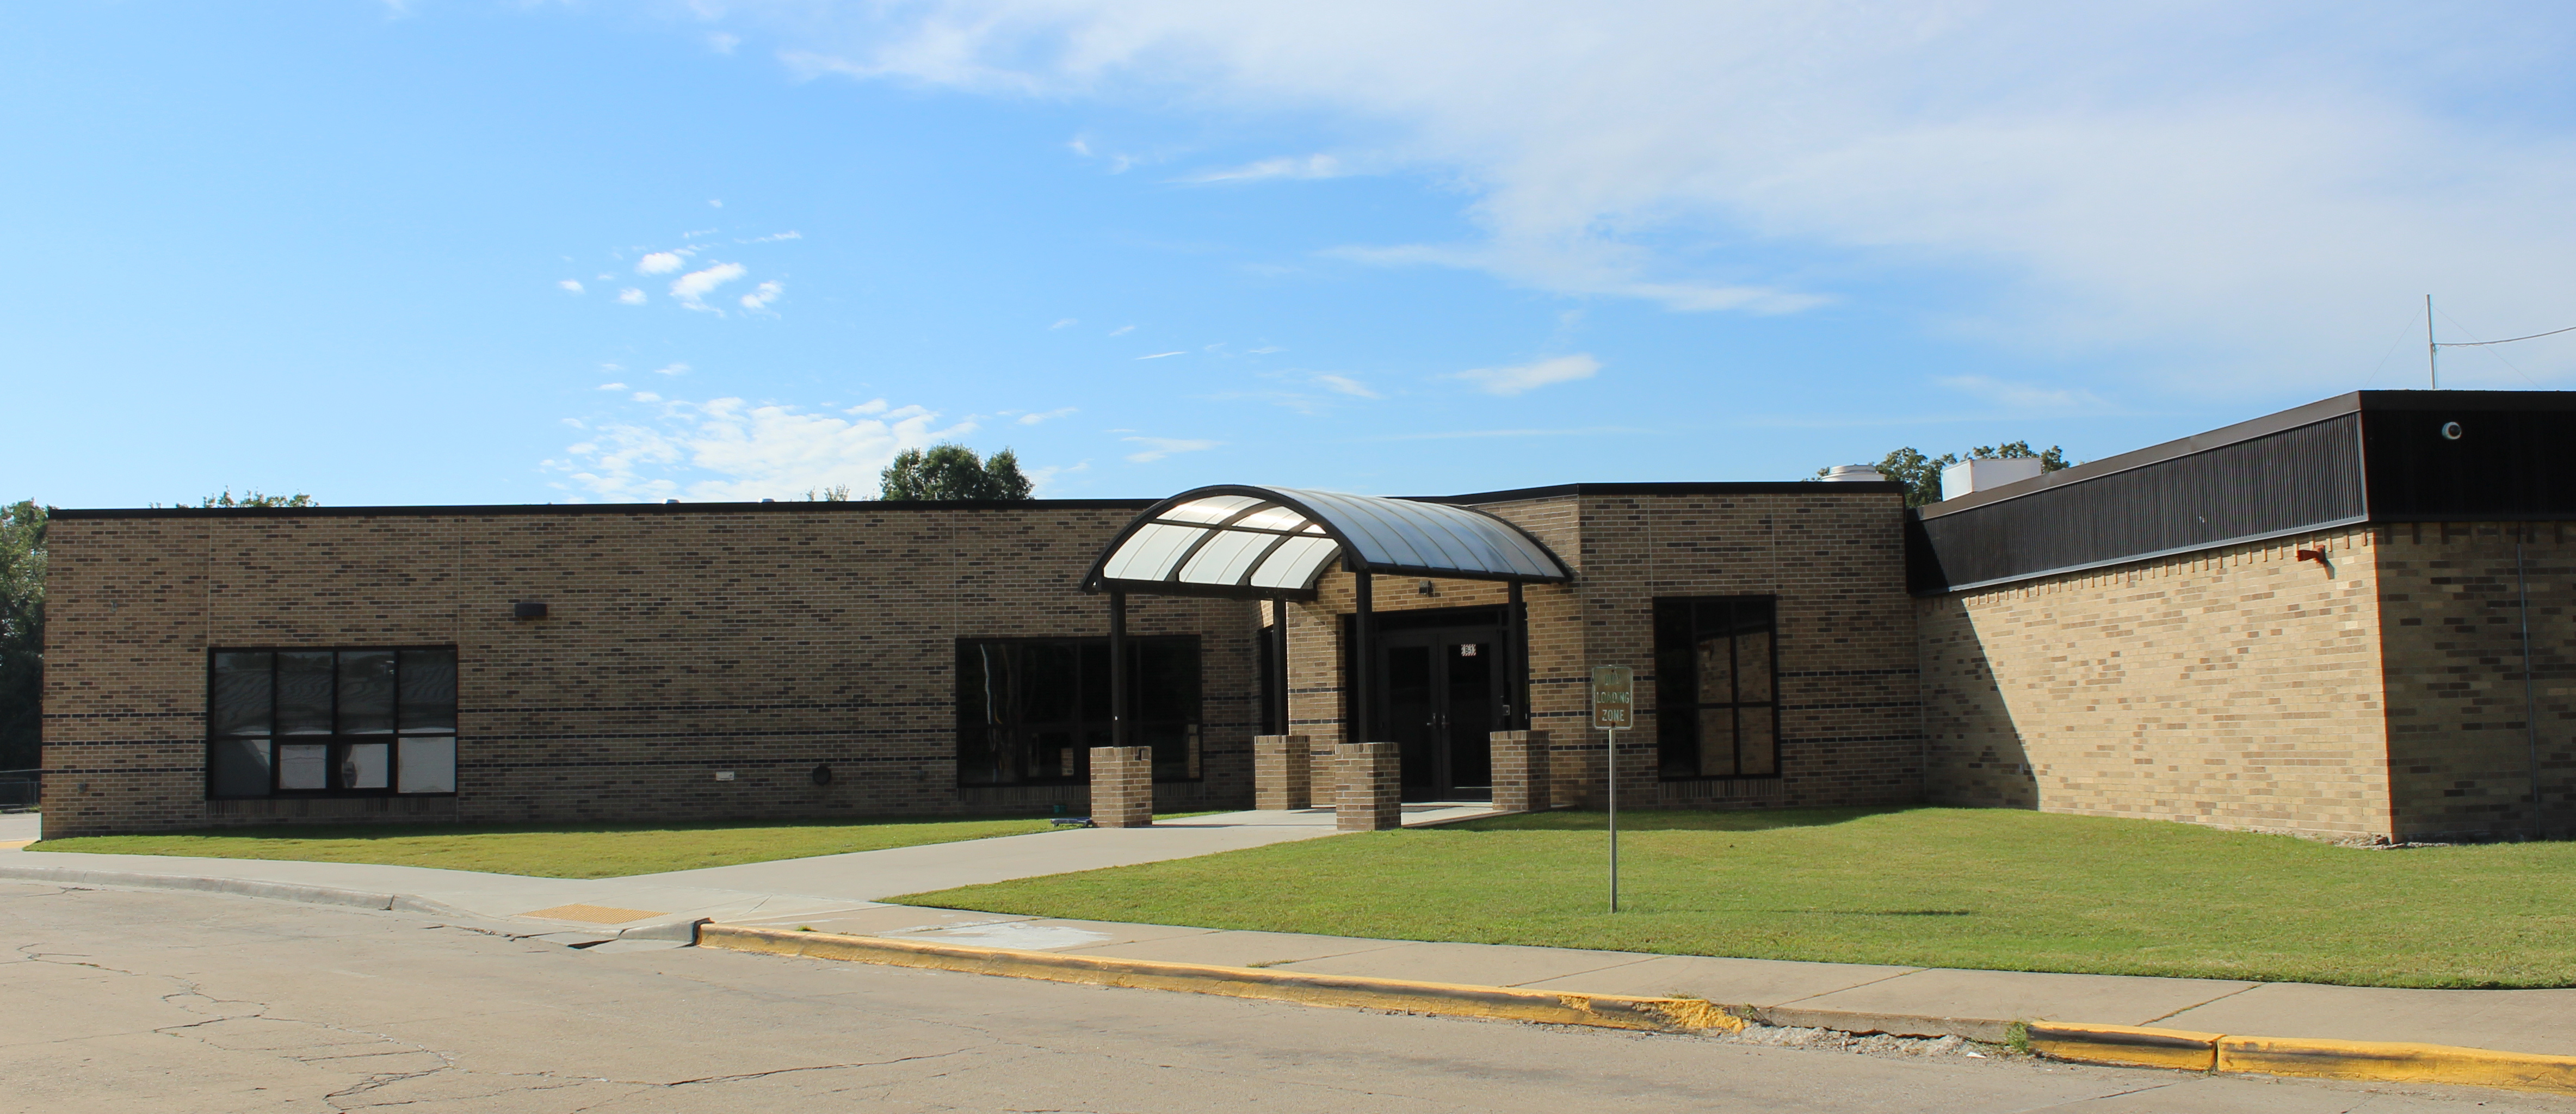 Early childhood center entry in 2017